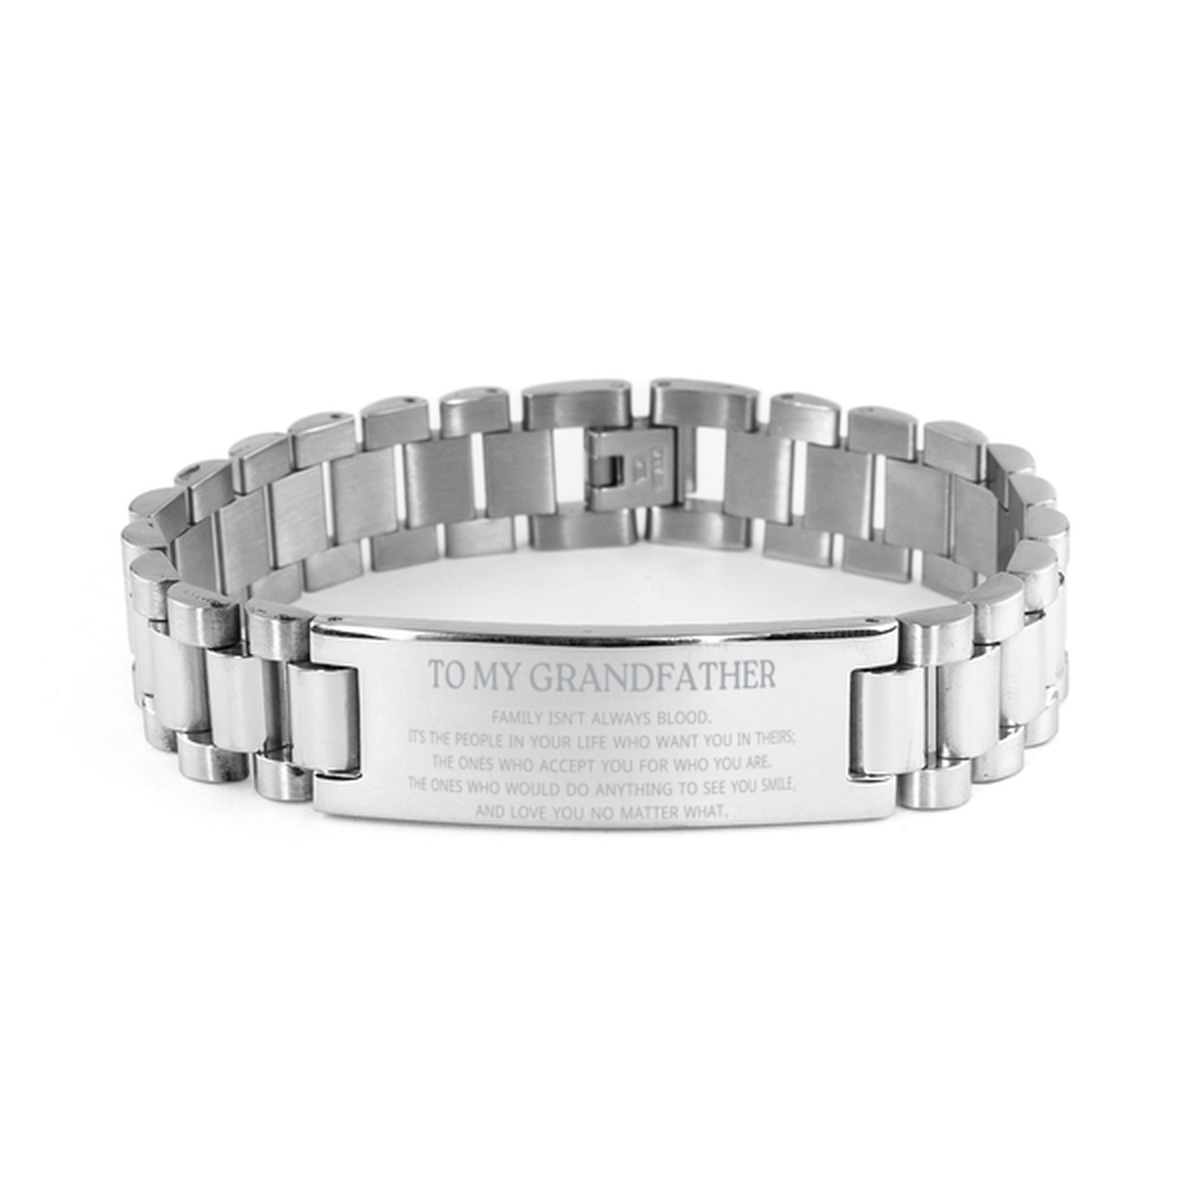 To My Grandfather Gifts, Family isn't always blood, Grandfather Ladder Stainless Steel Bracelet, Birthday Christmas Unique Present For Grandfather